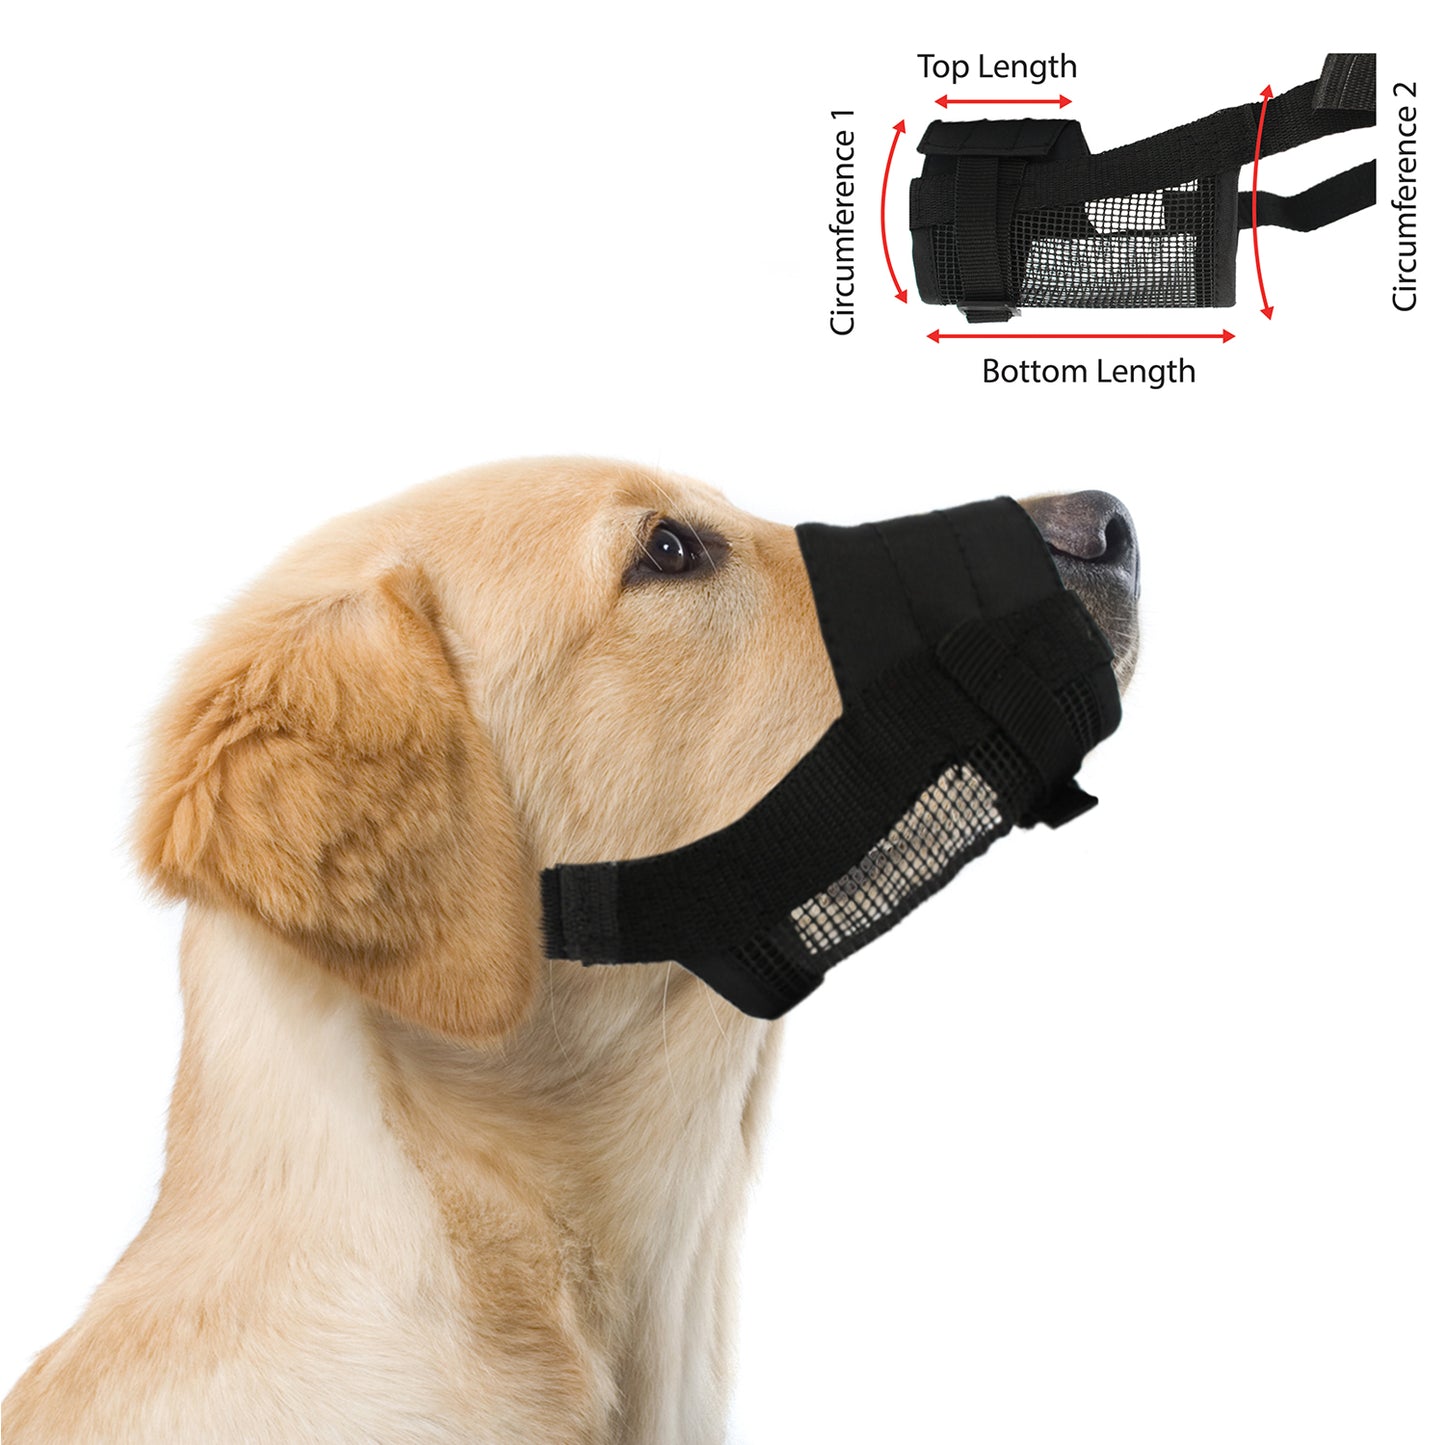 Adjustable Dog Grooming Muzzle - X-SMALL, SMALL, MEDIUM, LARGE, or X-LARGE